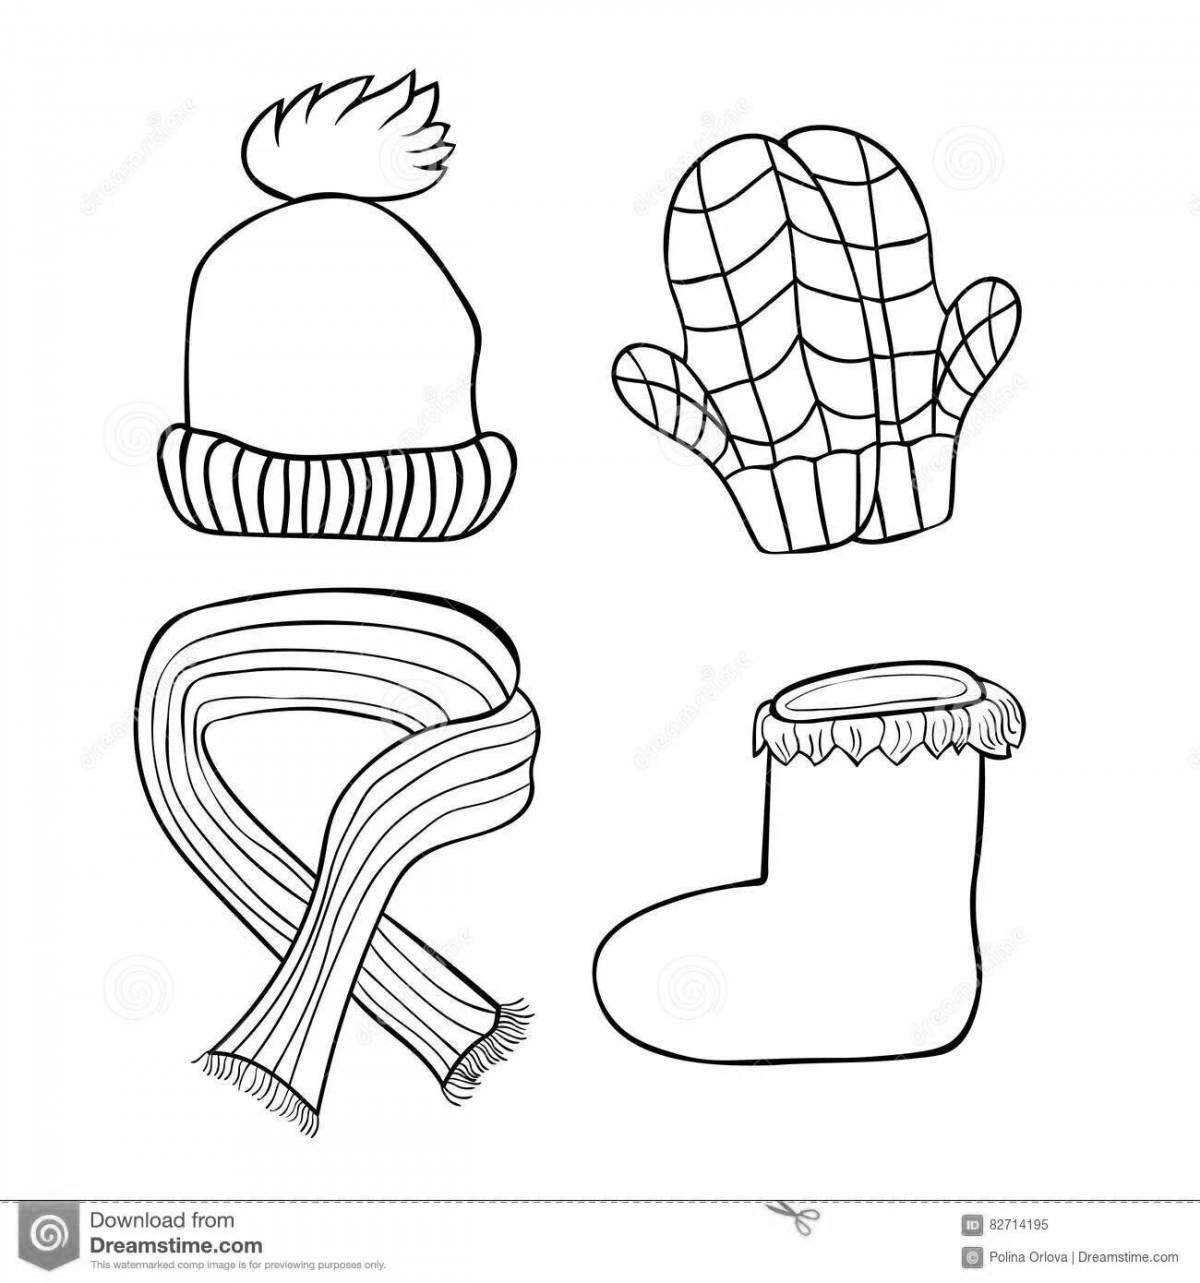 Creative scarf coloring for kids